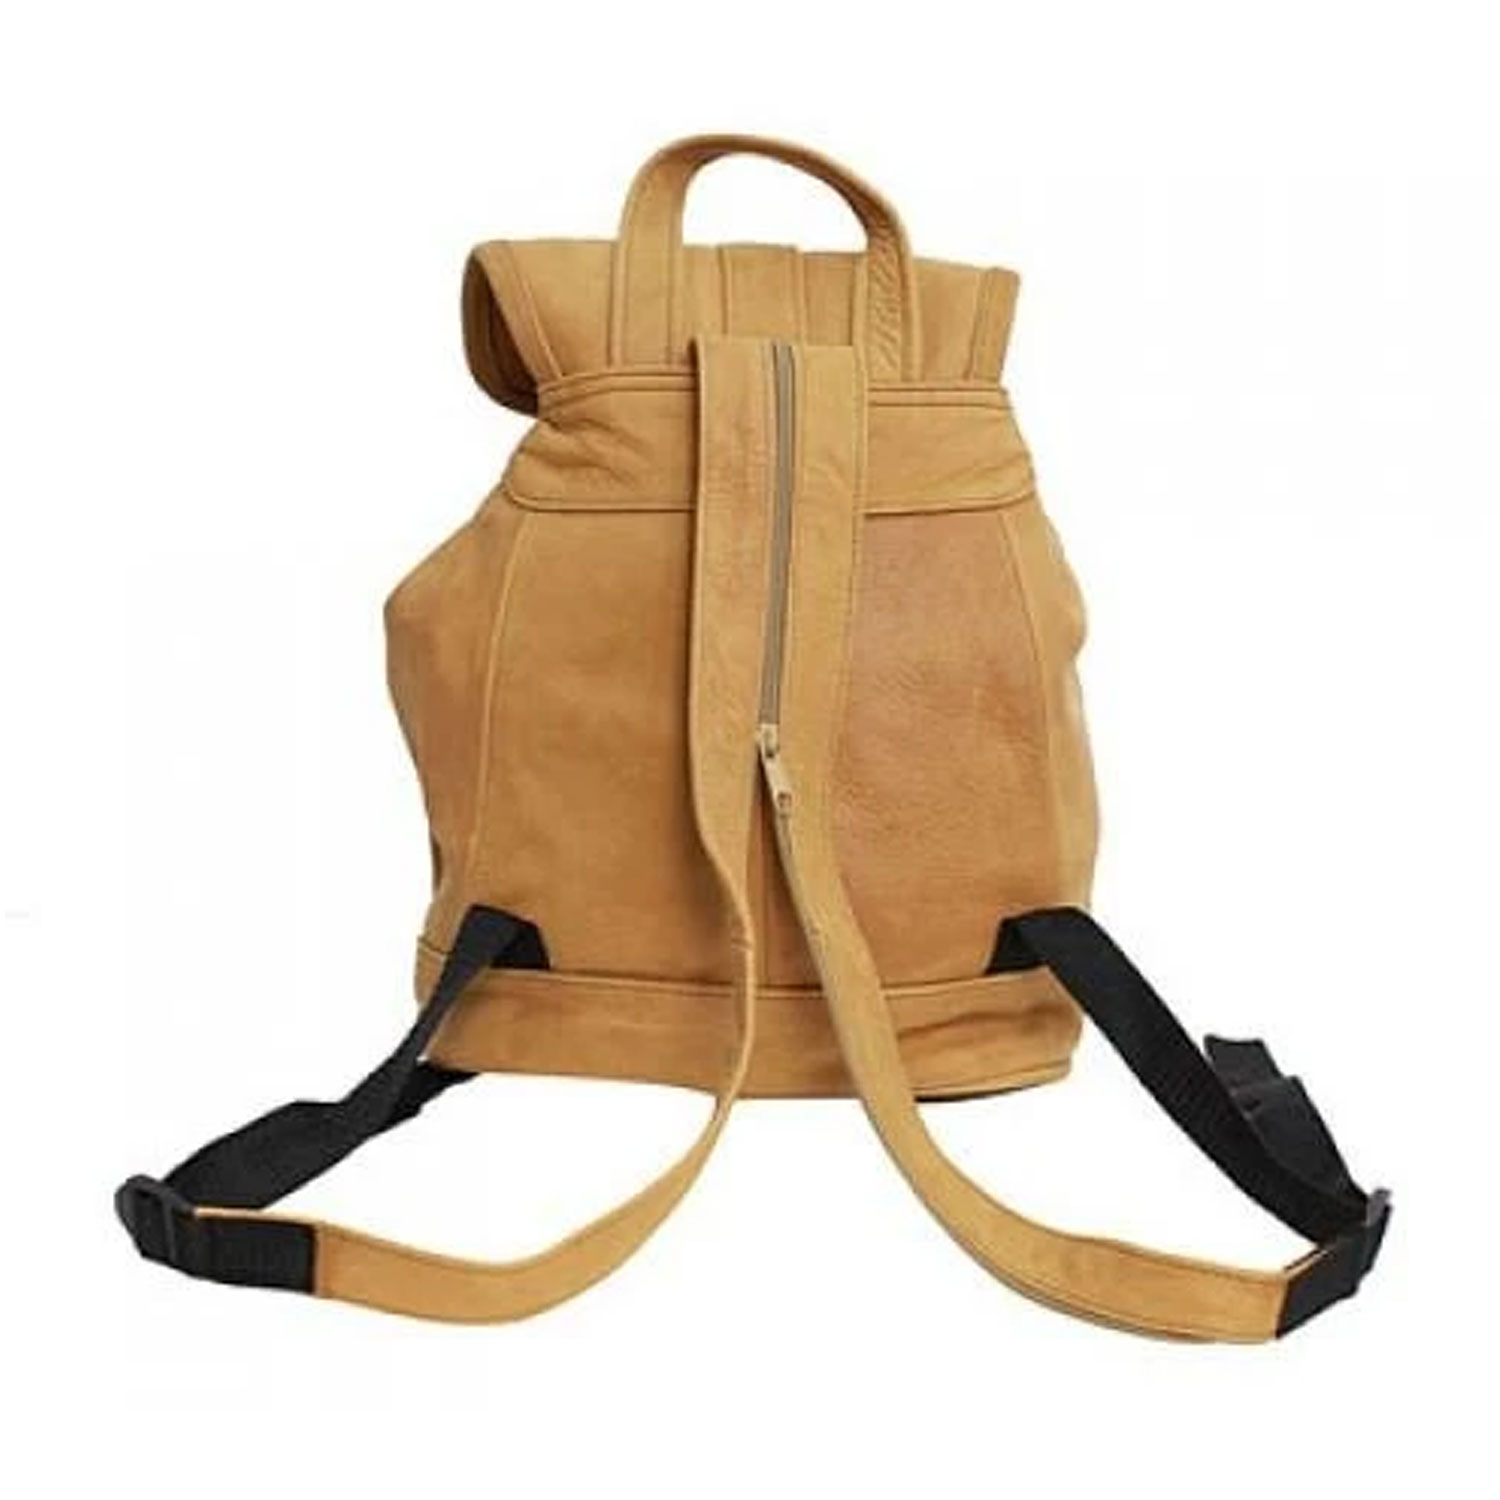 Leather Backpack, To Complement Any Outfit